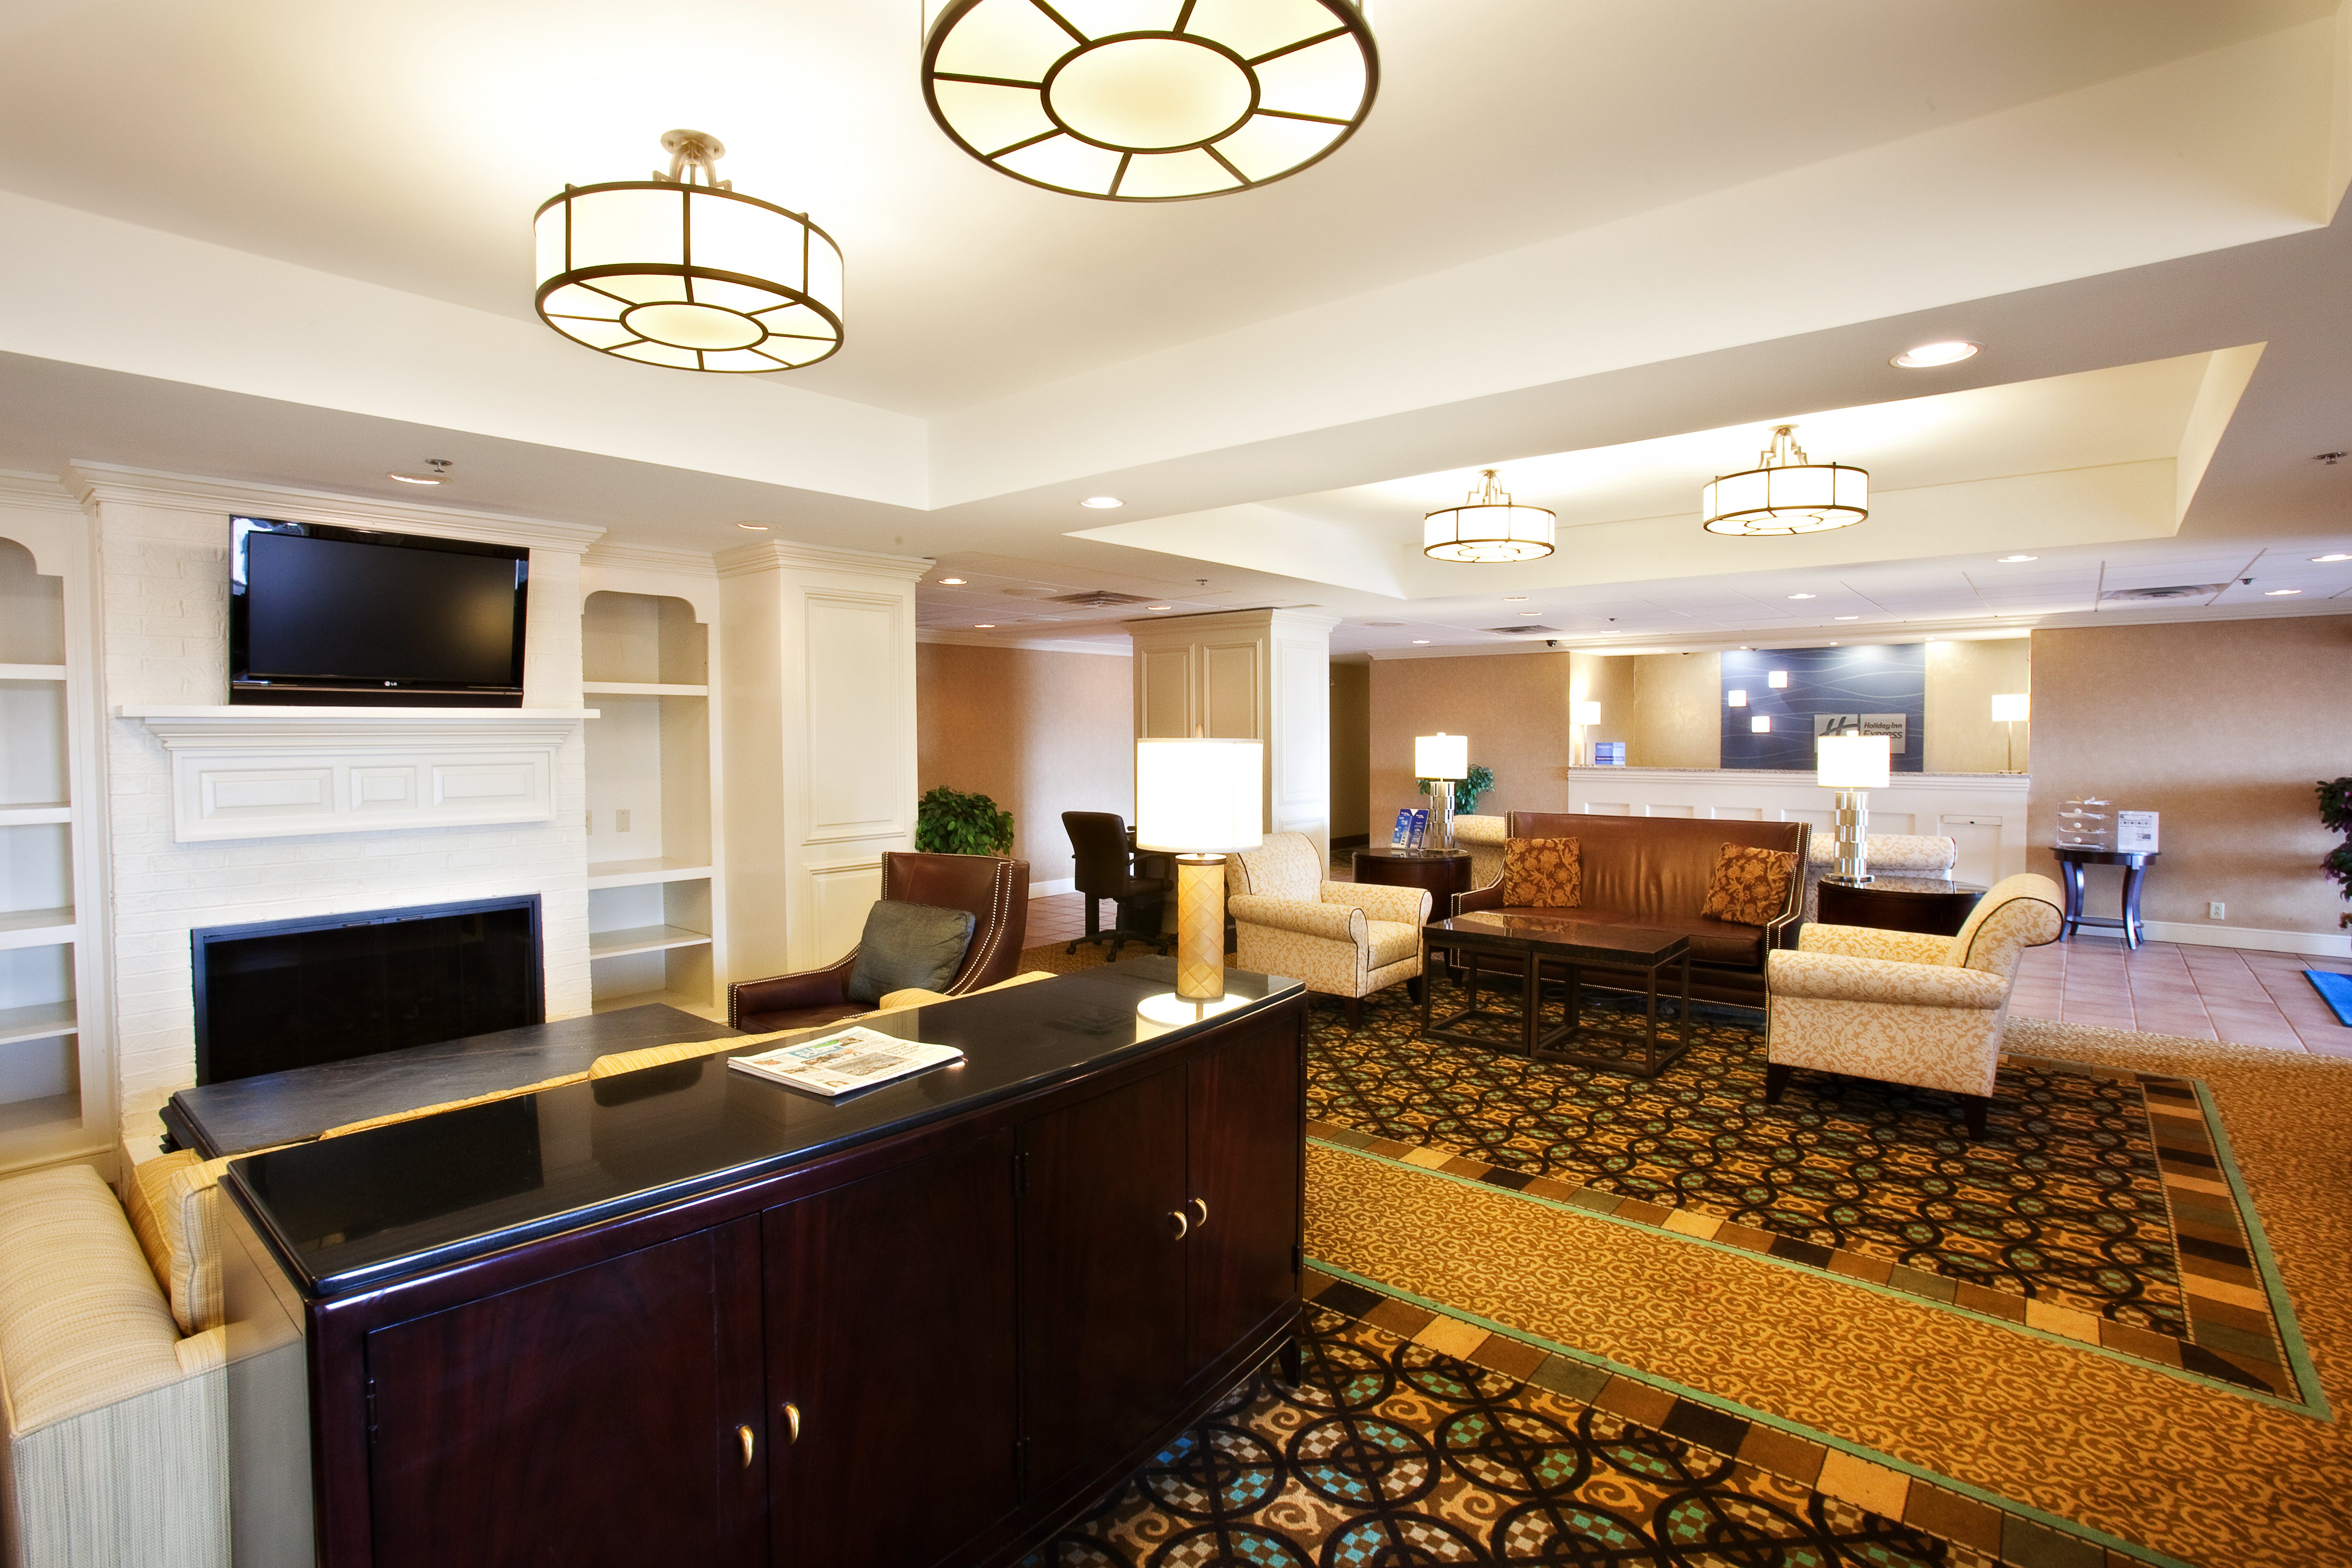 Relax and unwind in the Holiday Inn Express lobby